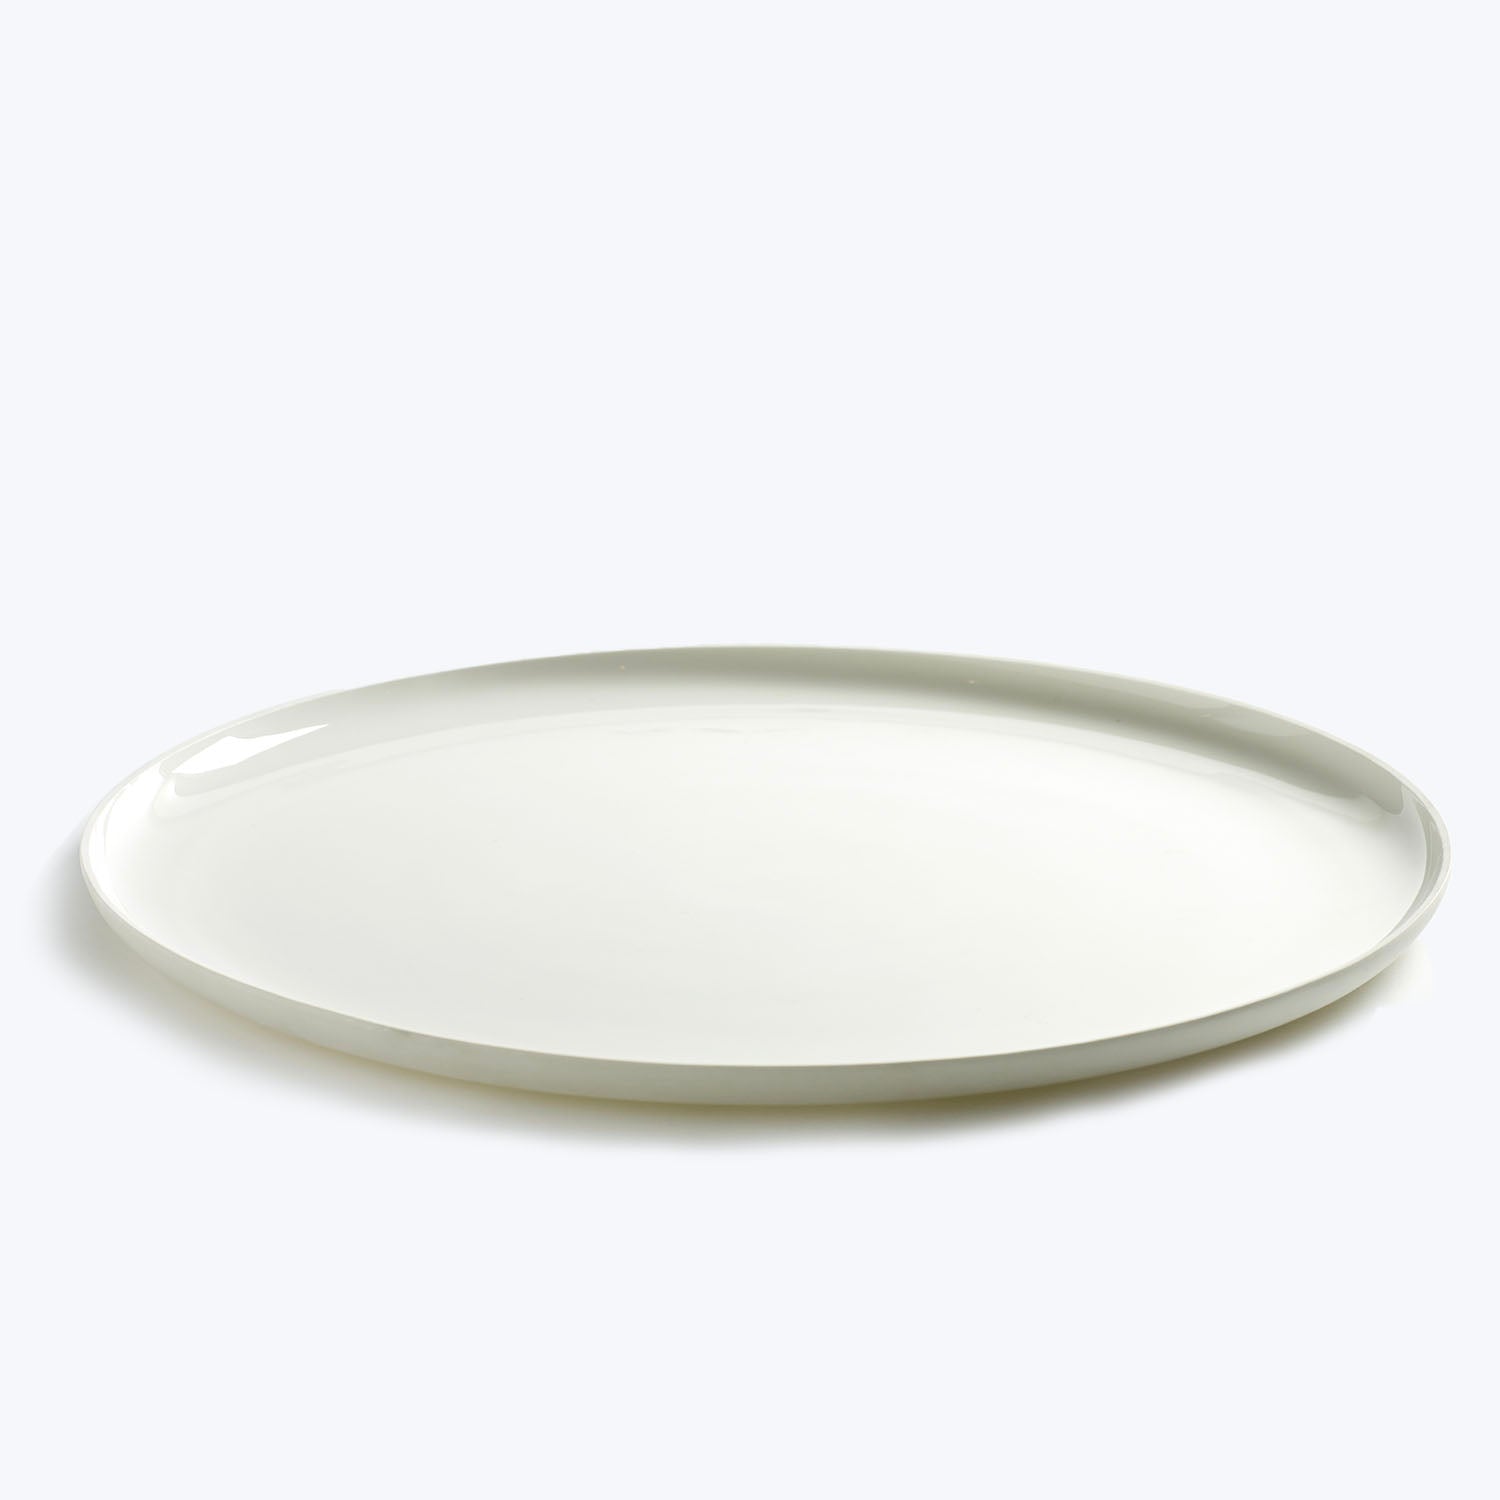 Piet Boon Base Tableware Collection Matte White / XXLarge Plate (Set of 4)